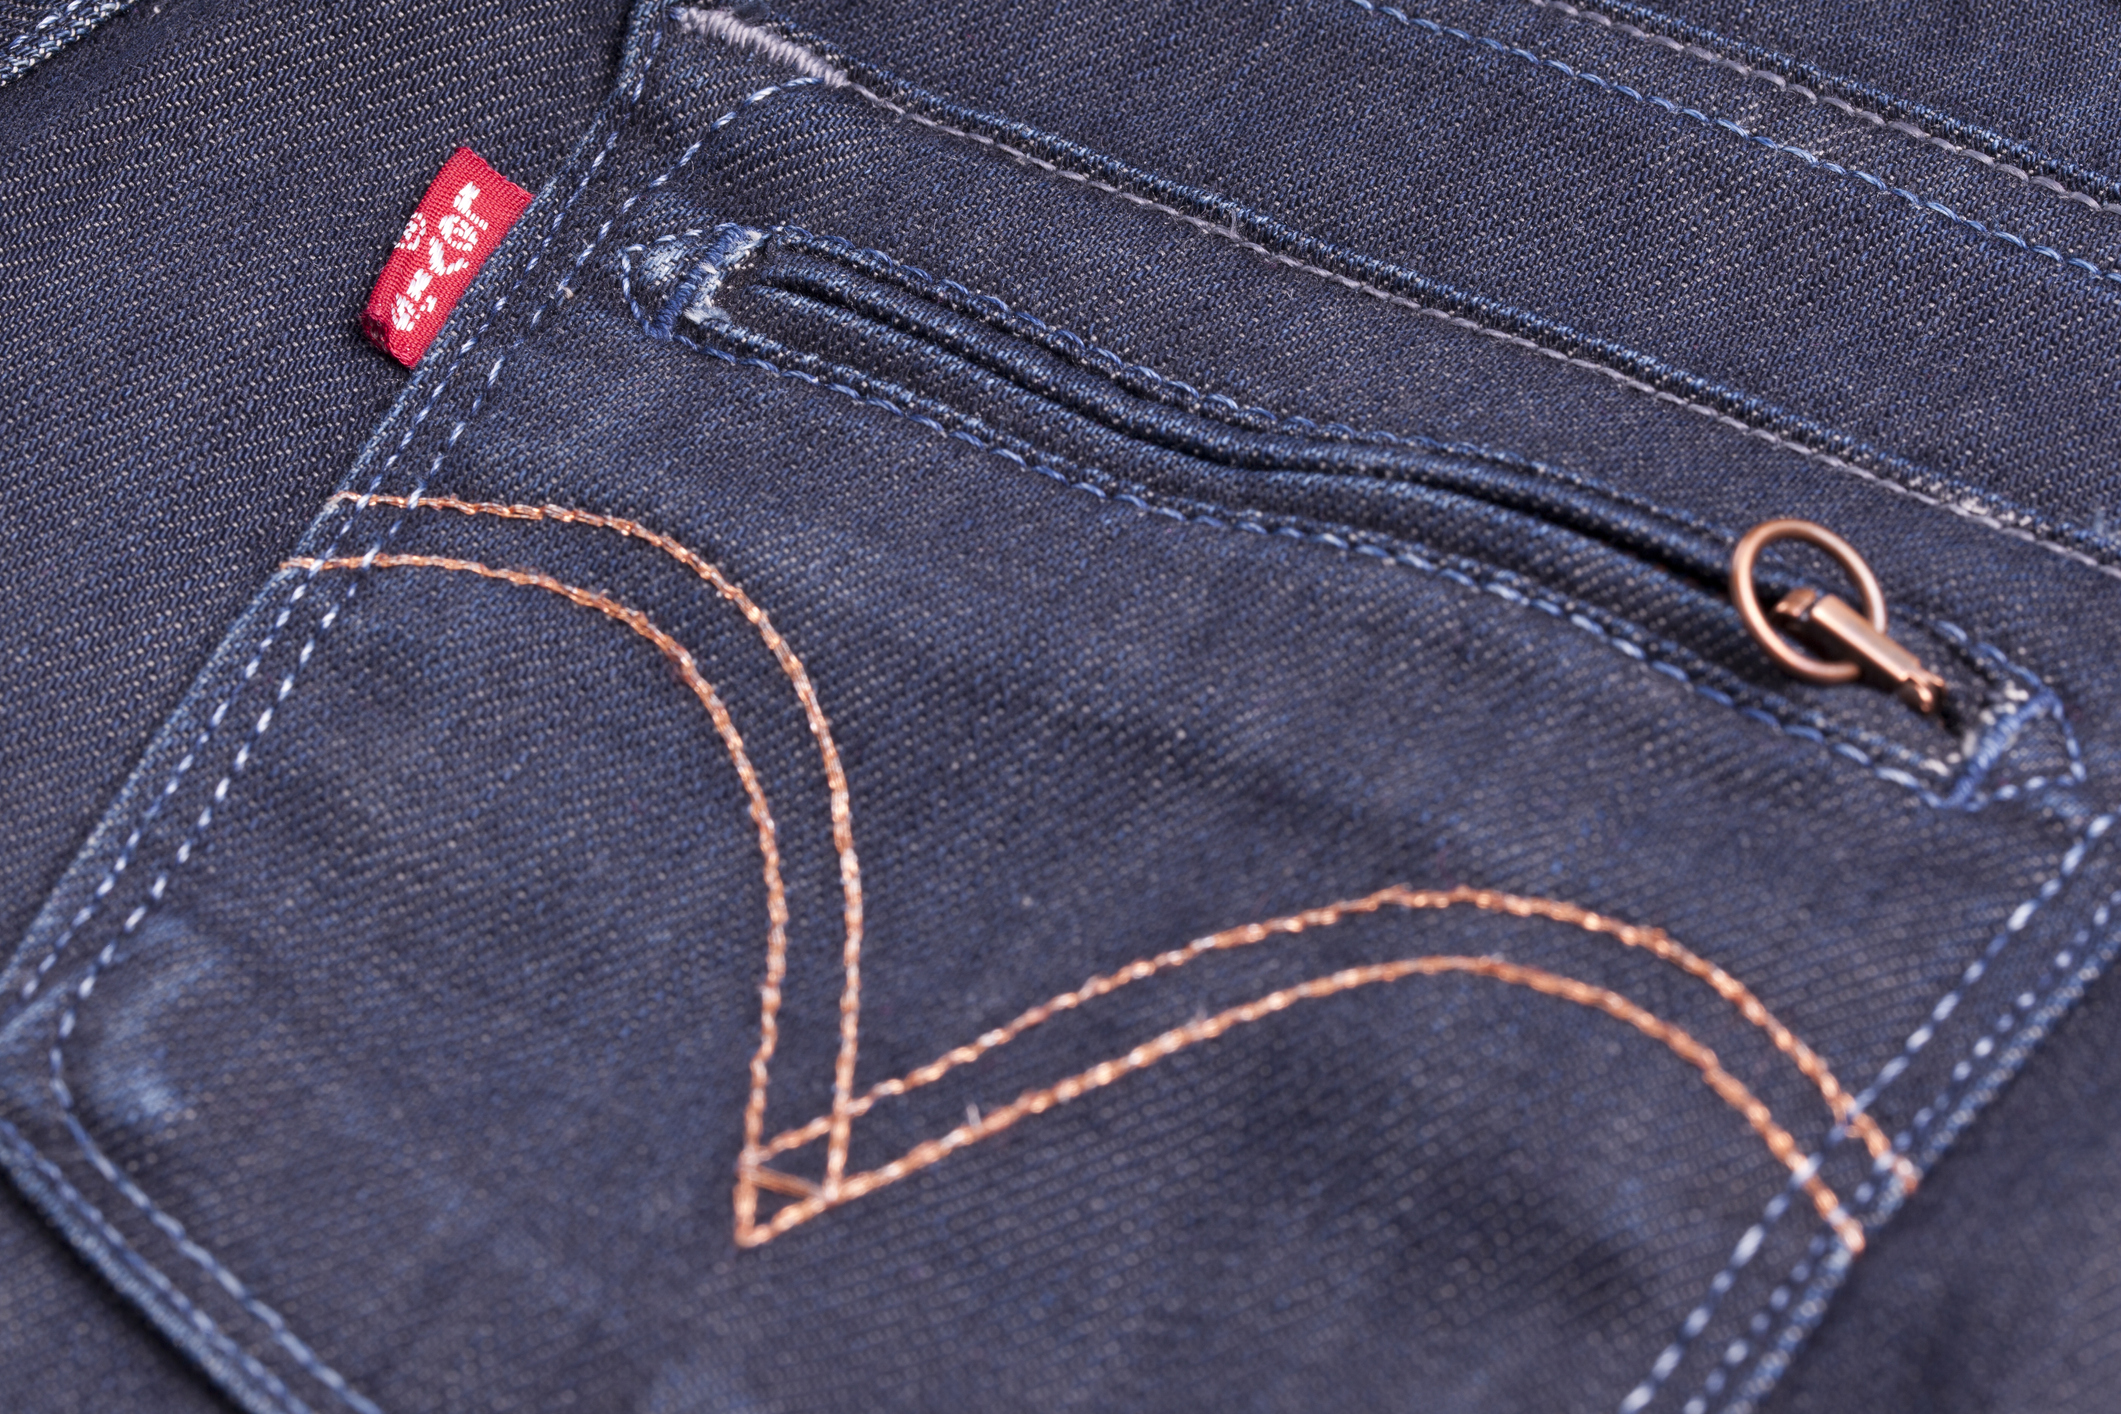 Do Not Wash You Levi’s, Says Company CEO | PURSUIT